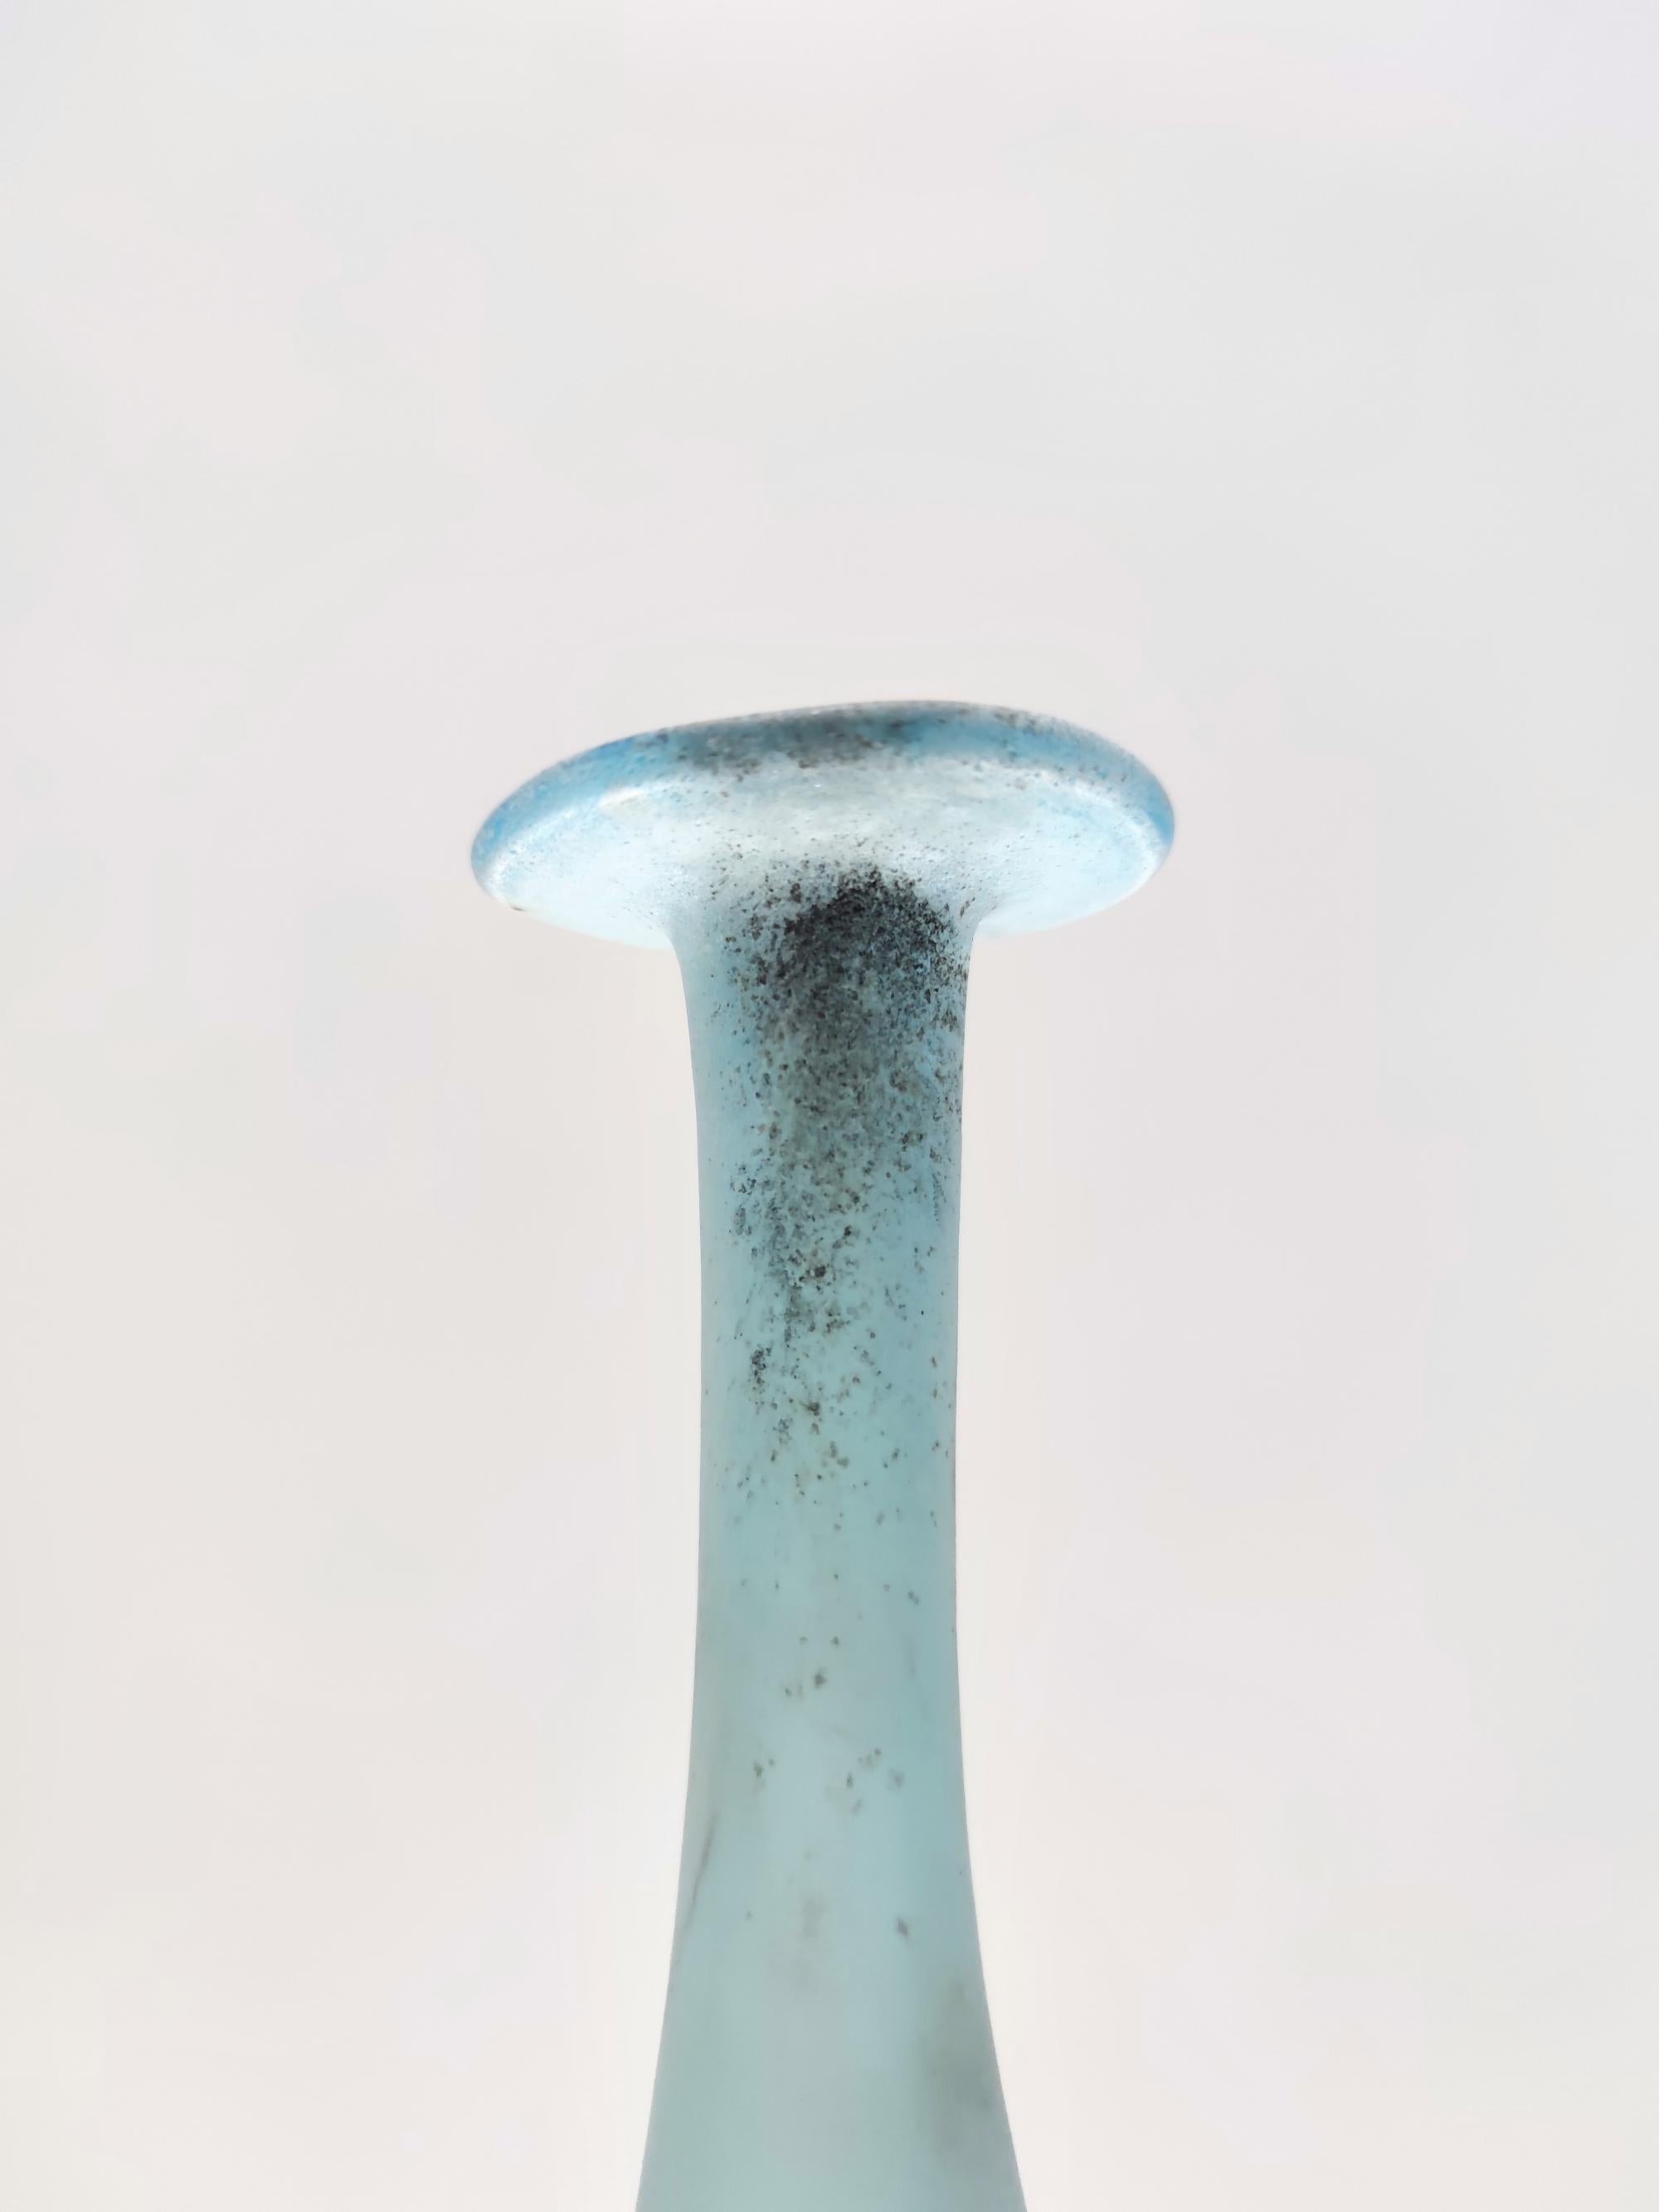 Vintage Light Blue Scavo Glass Bottle Vase by Gino Cenedese, Italy In Excellent Condition For Sale In Bresso, Lombardy